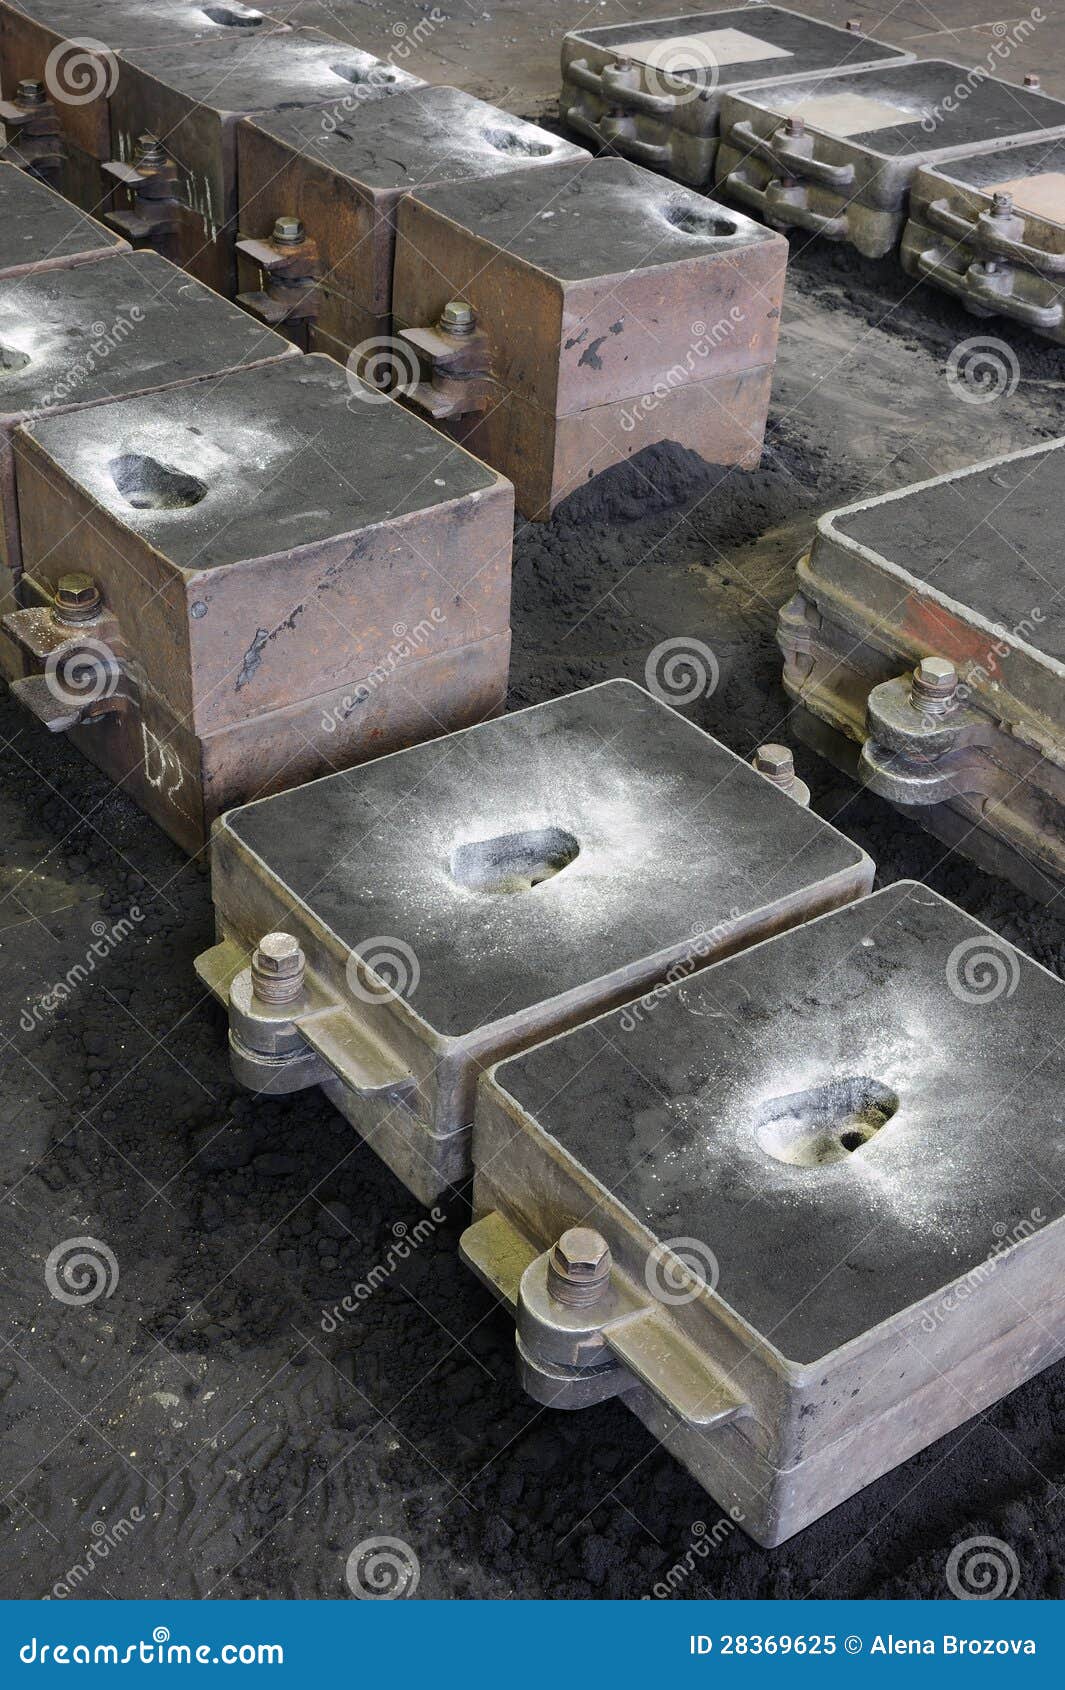 foundry, sand molded casting